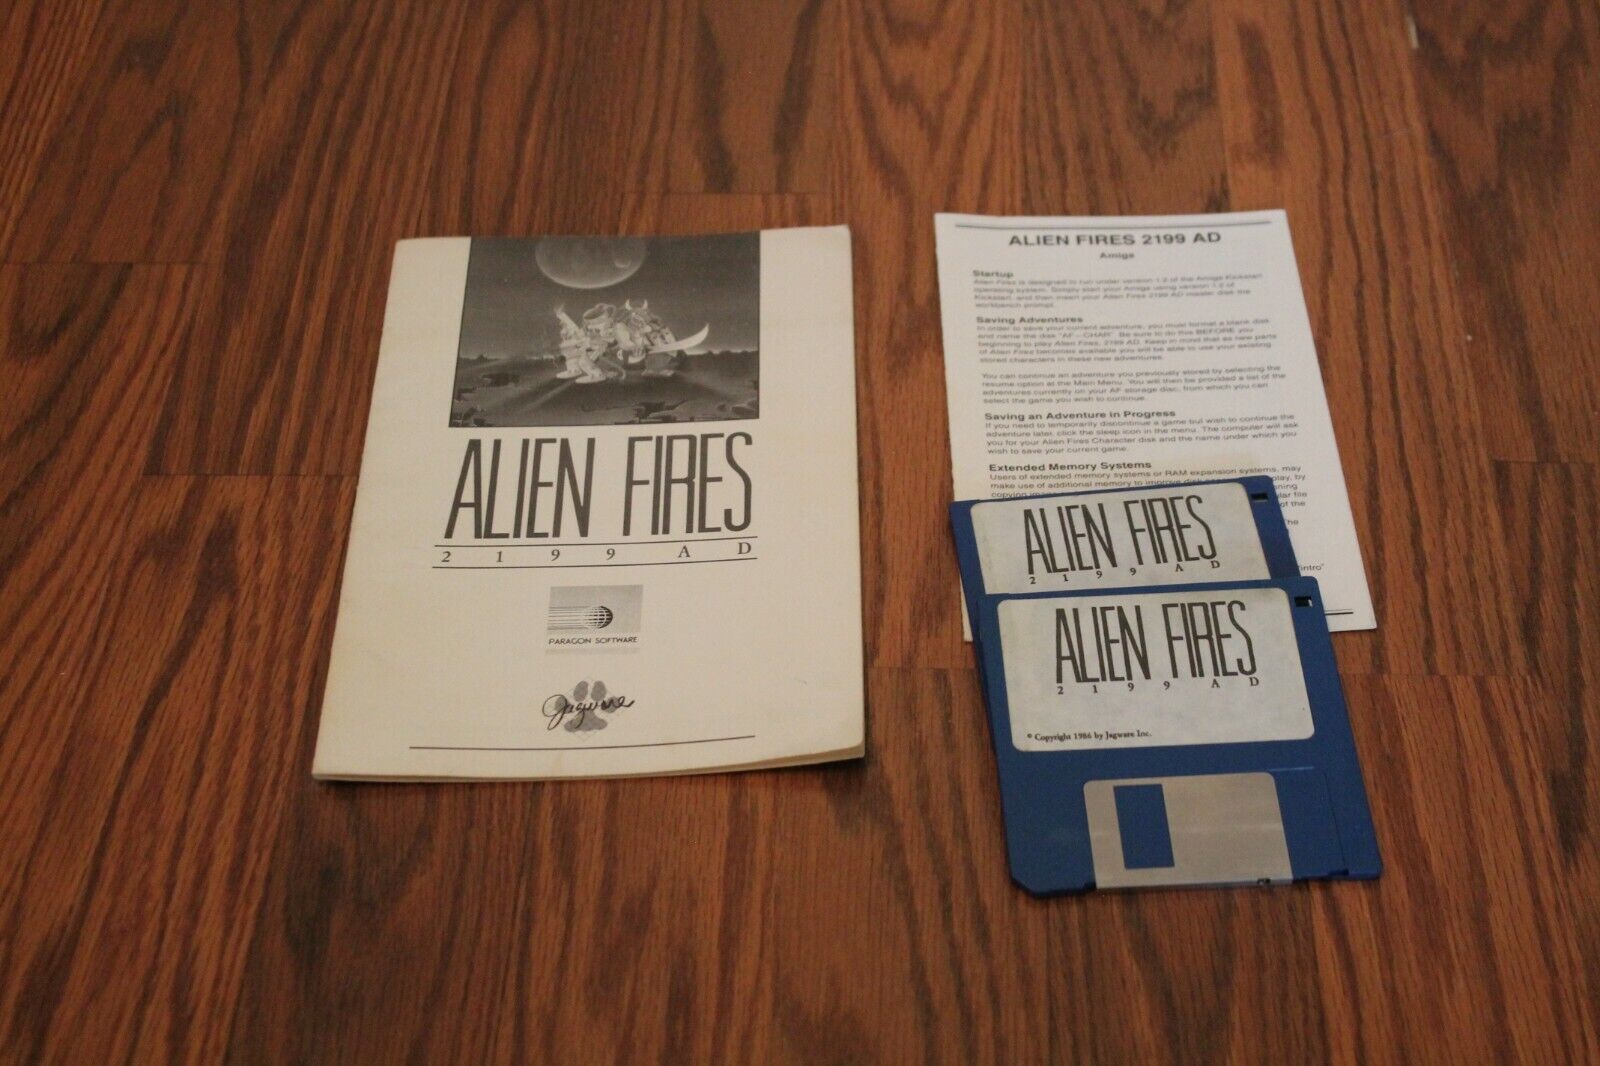 Alien Fires 2199 AD Commodore Amiga with instructions on 3.5